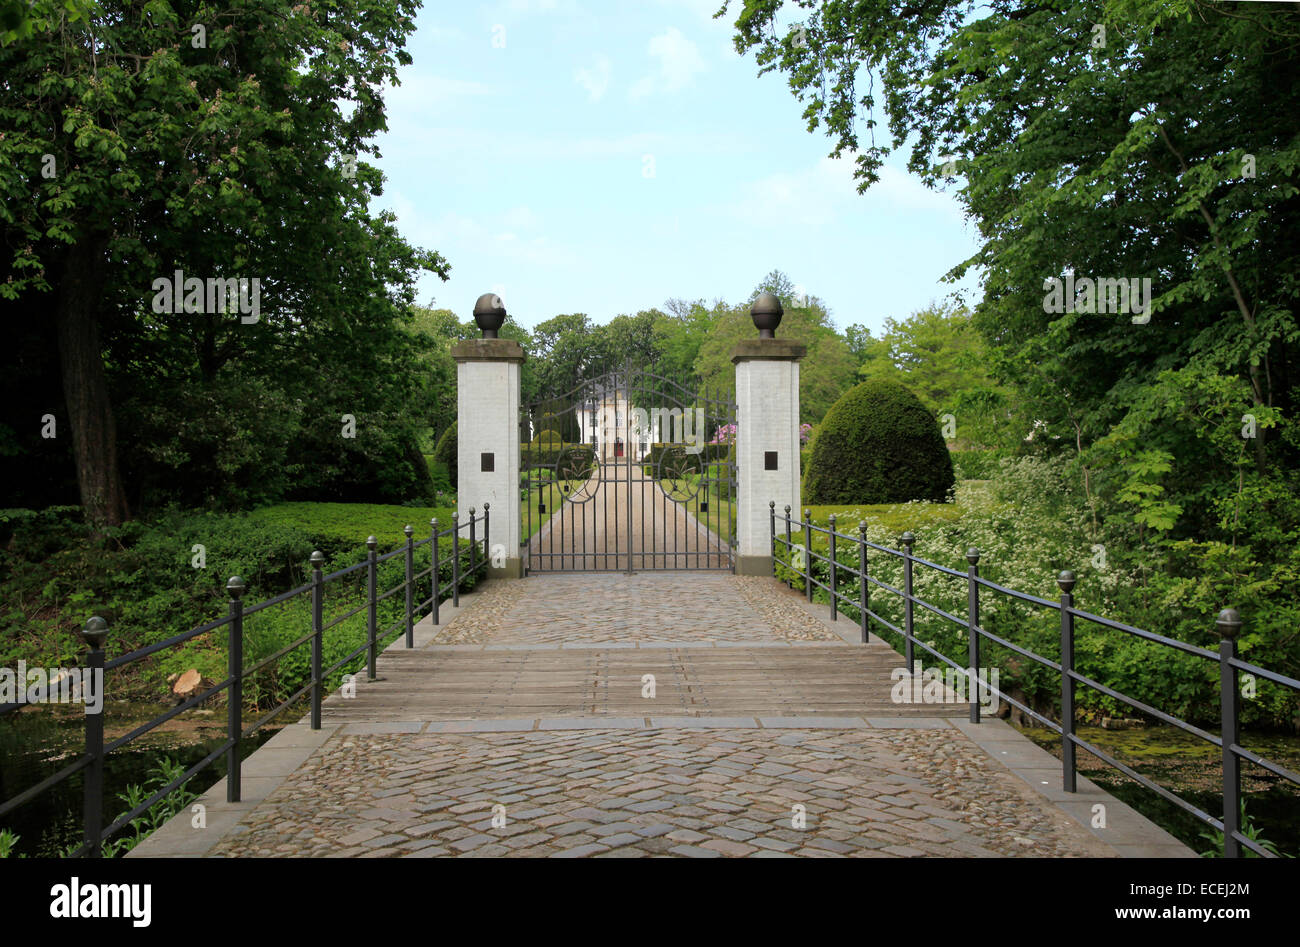 Schackenborg Castle was from 1995 to 2014 the residence of Prince Joachim of Denmark and Princess Marie, who are leading an agricultural and forestry operation. Photo: Klaus Nowottnick Date: May 27, 2012 Stock Photo